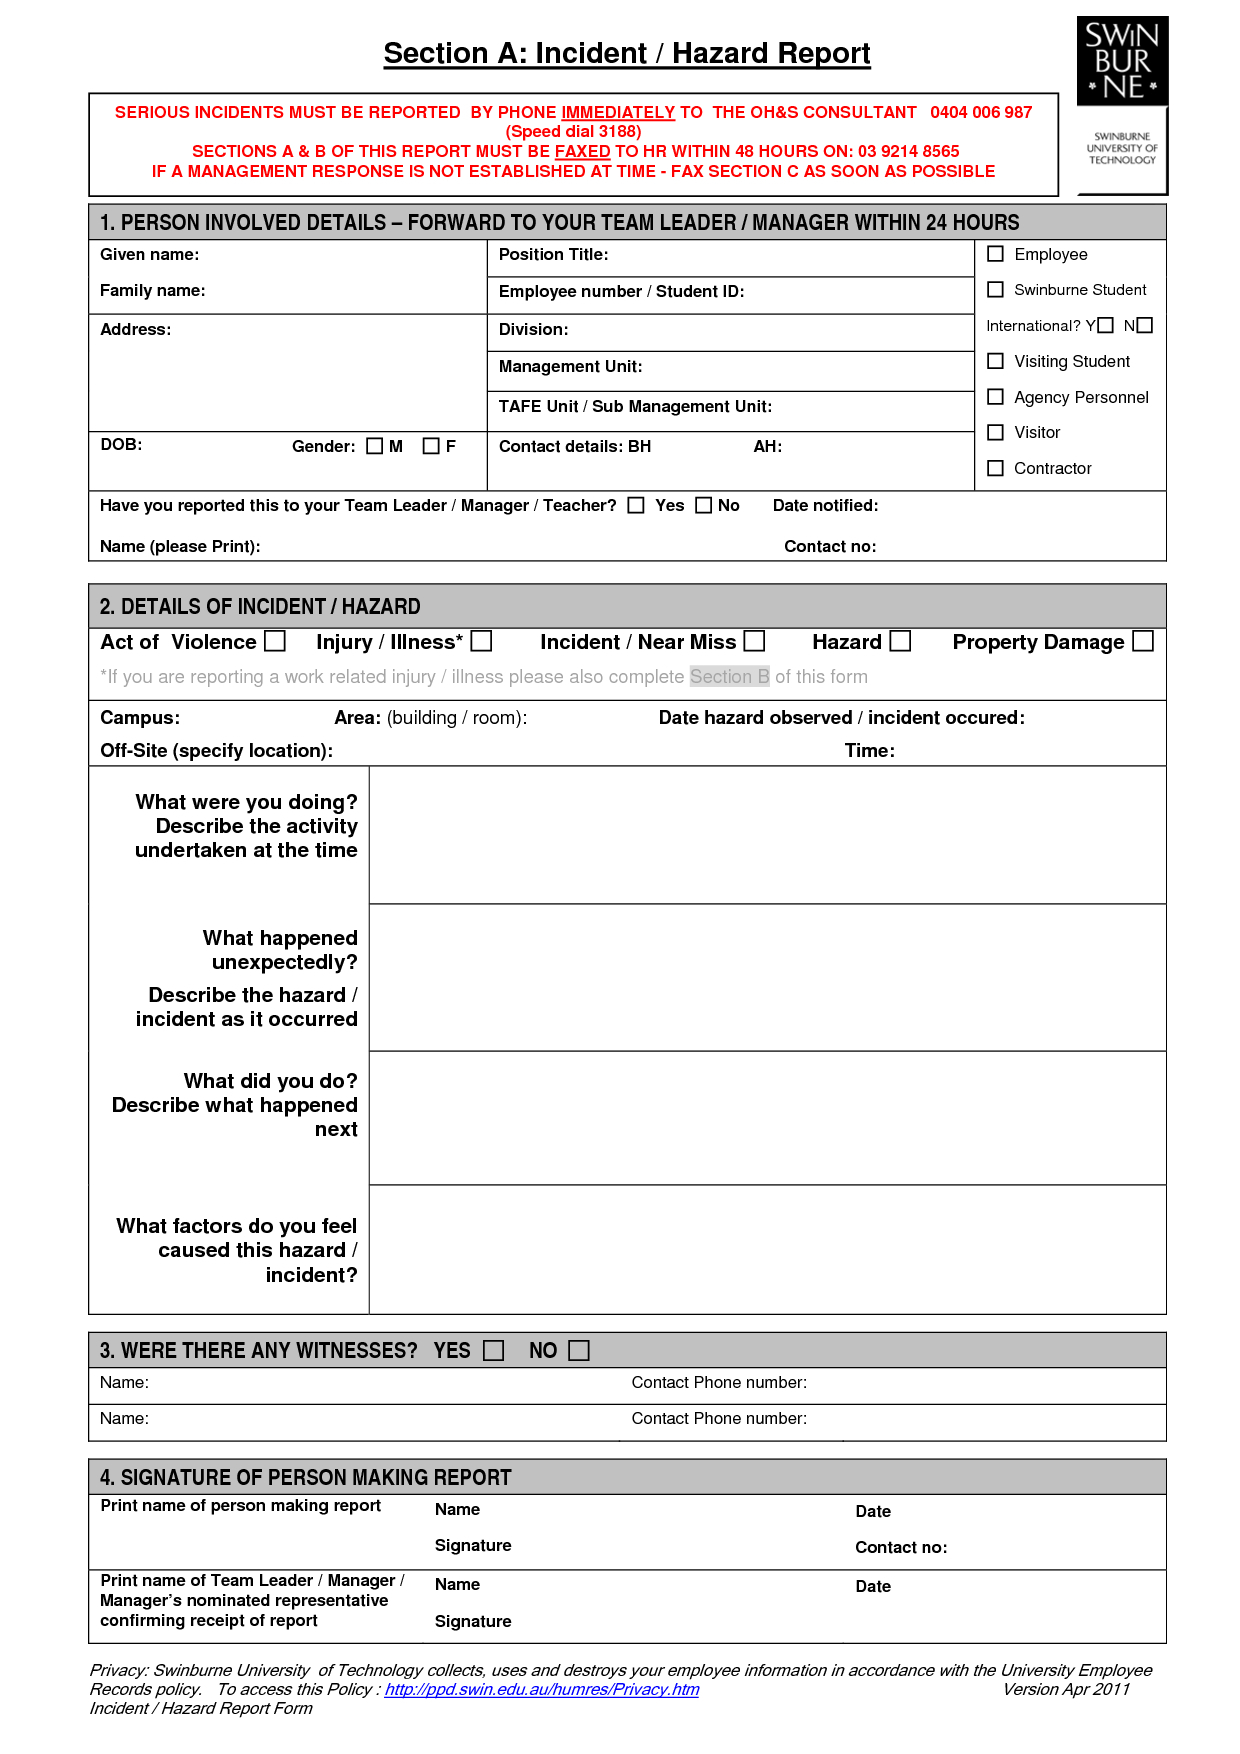 Hazard Incident Report Form Template – Business Template Ideas With Regard To Hazard Incident Report Form Template